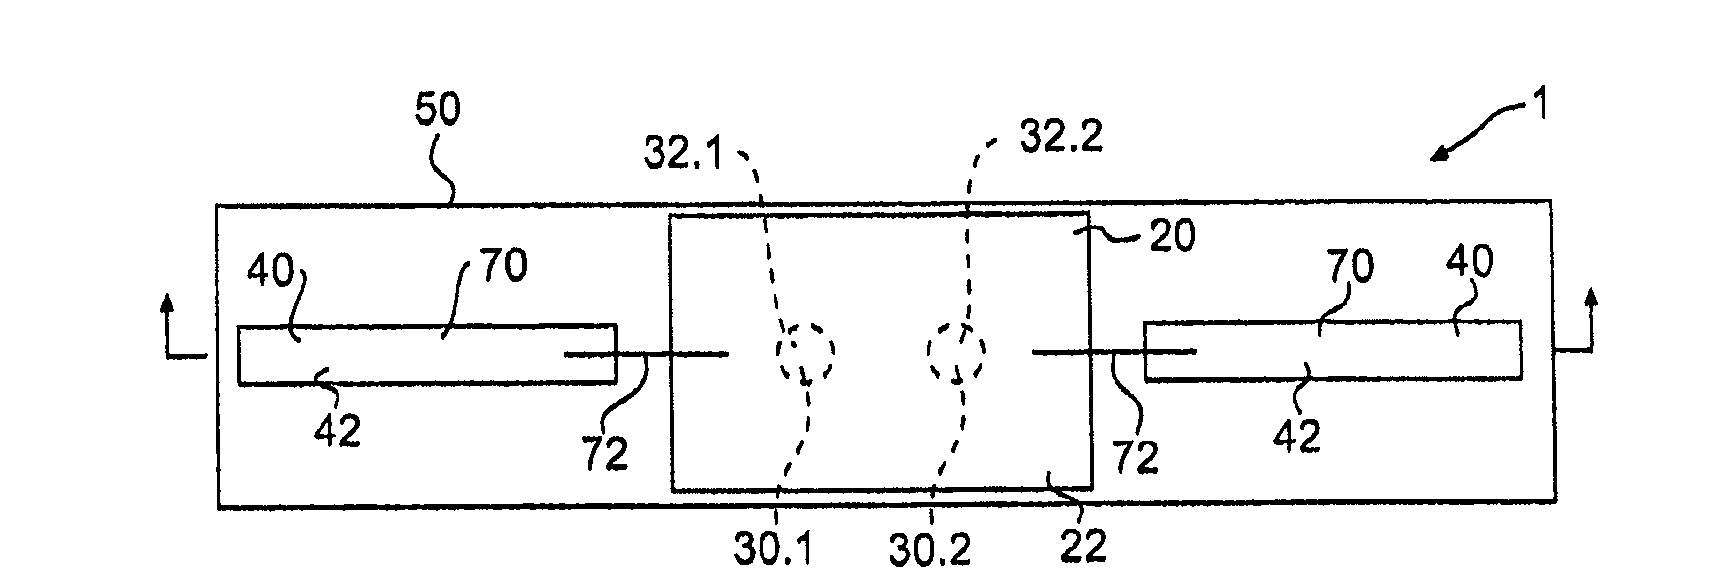 Apparatus for housing a light assembly